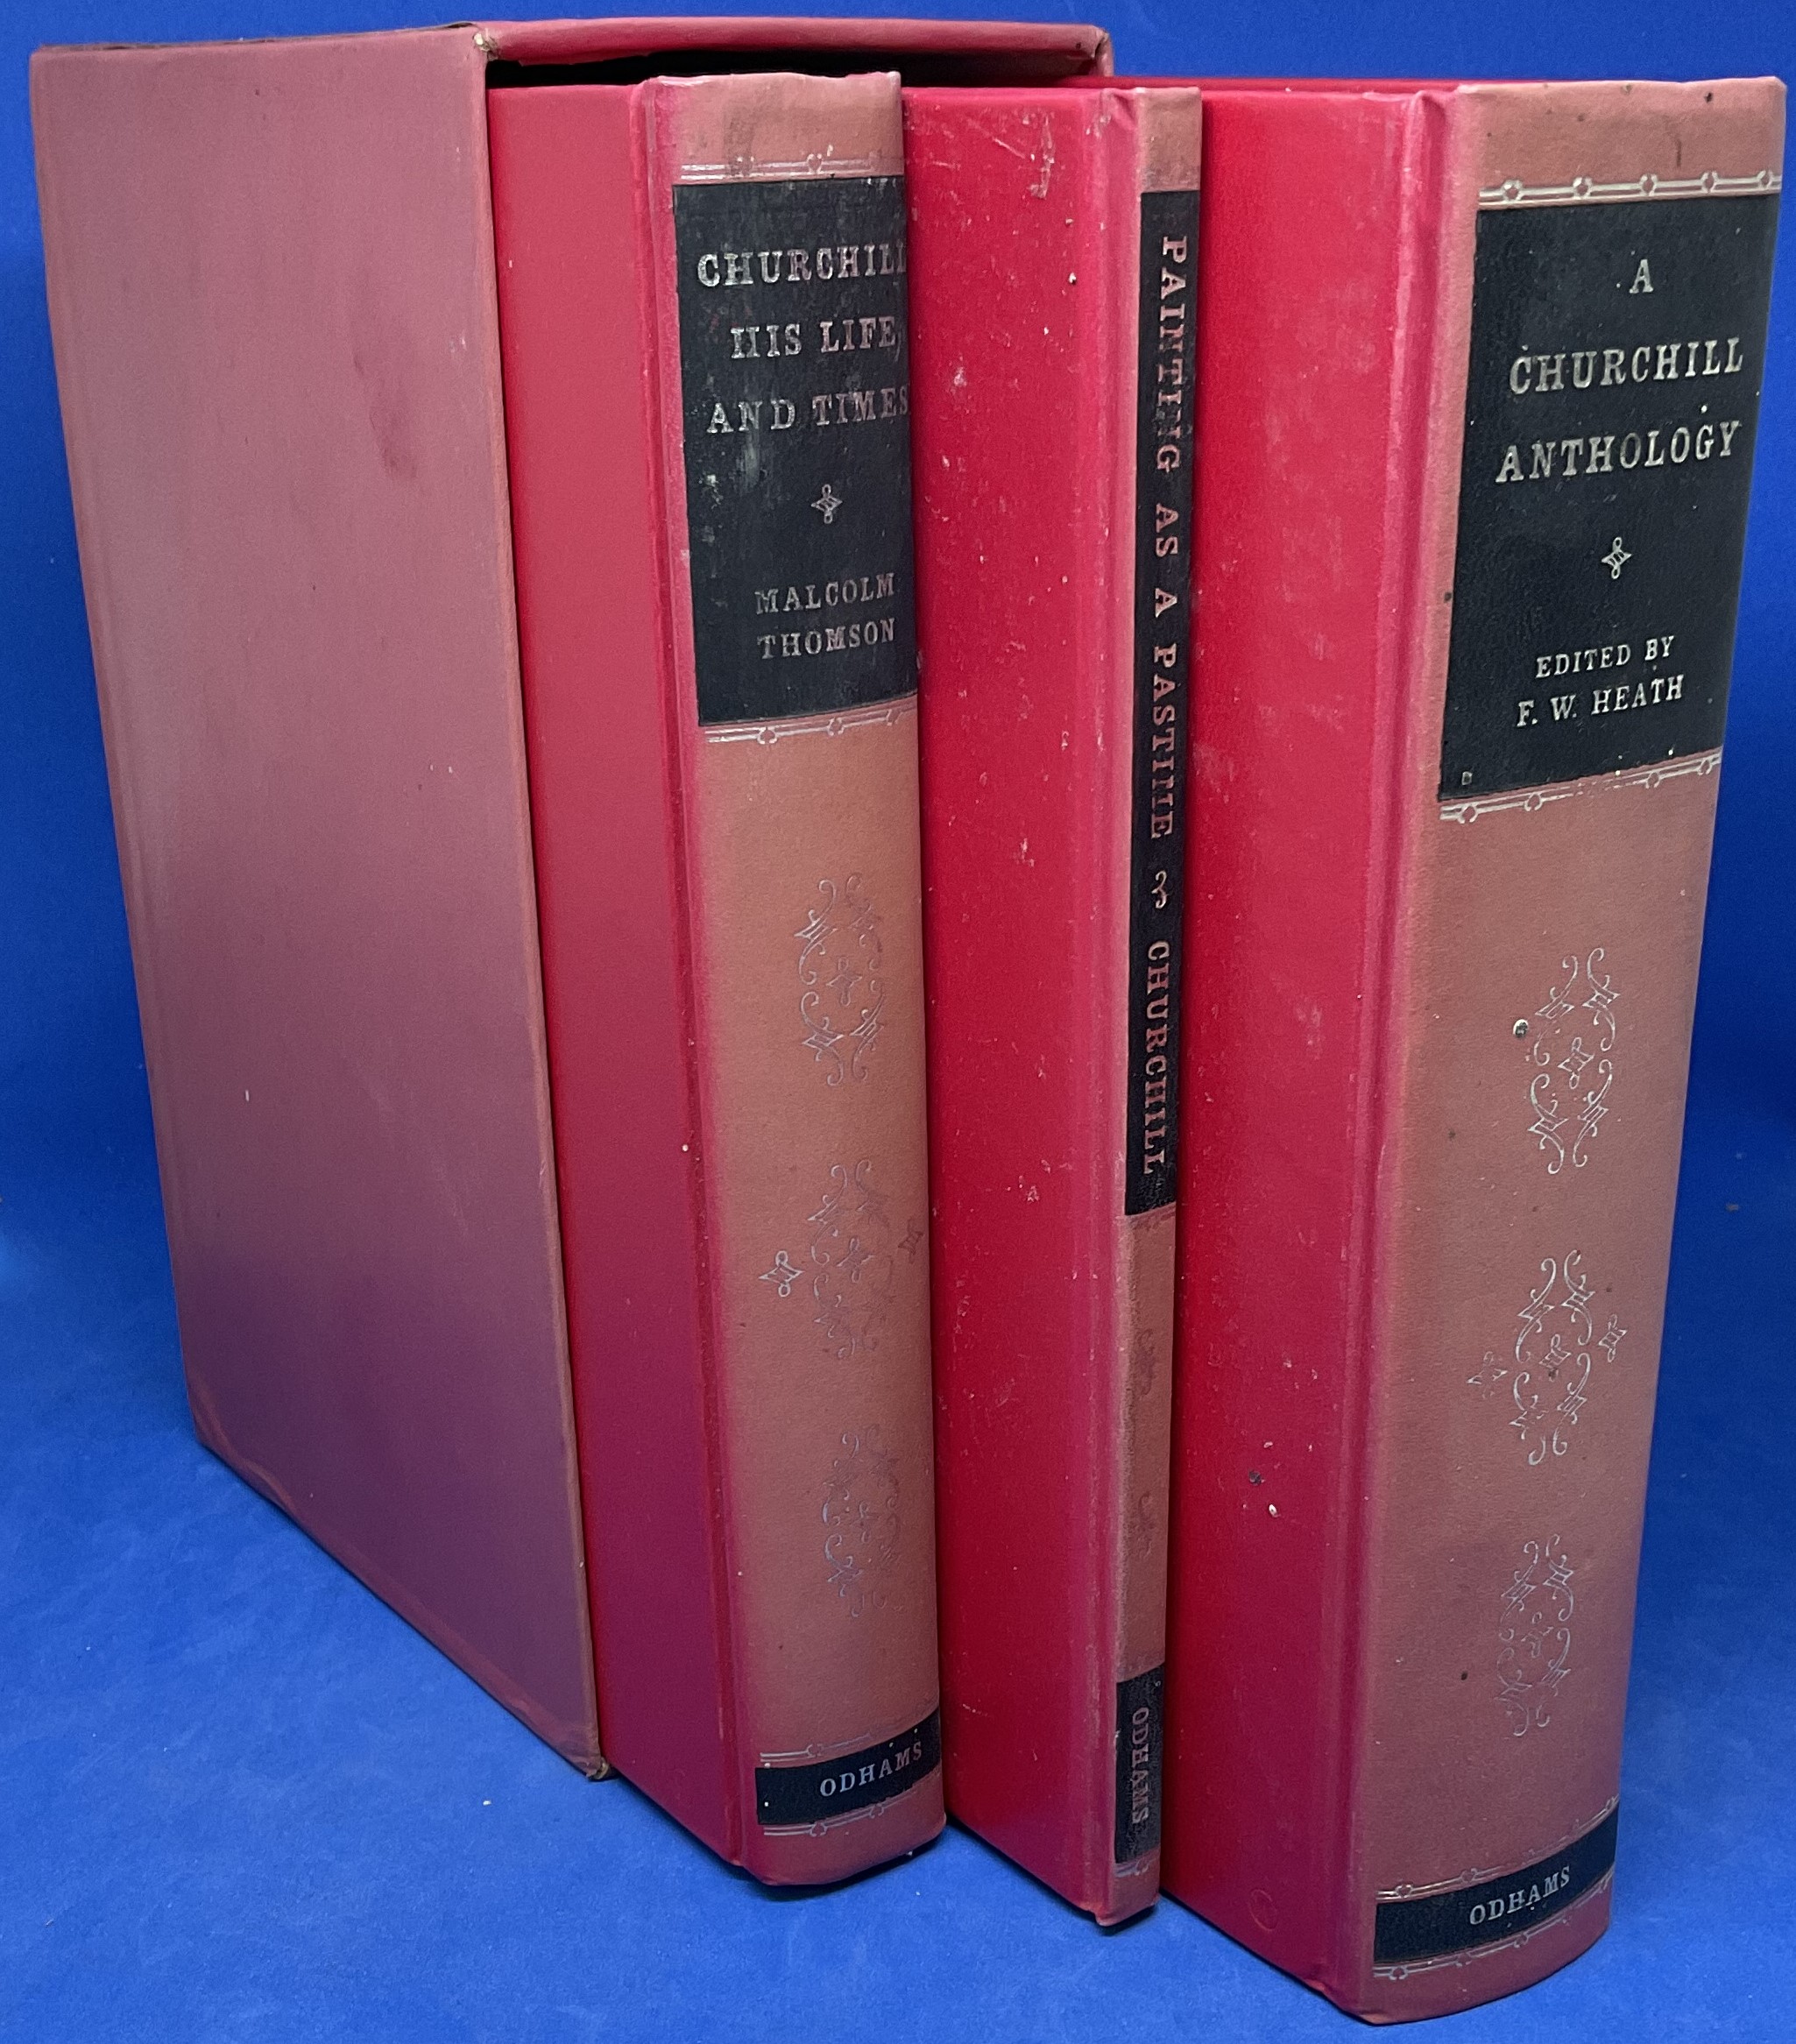 Winston Churchill Book Collection of 3 Books. A Churchill Anthology Hardback Book, Churchill, His